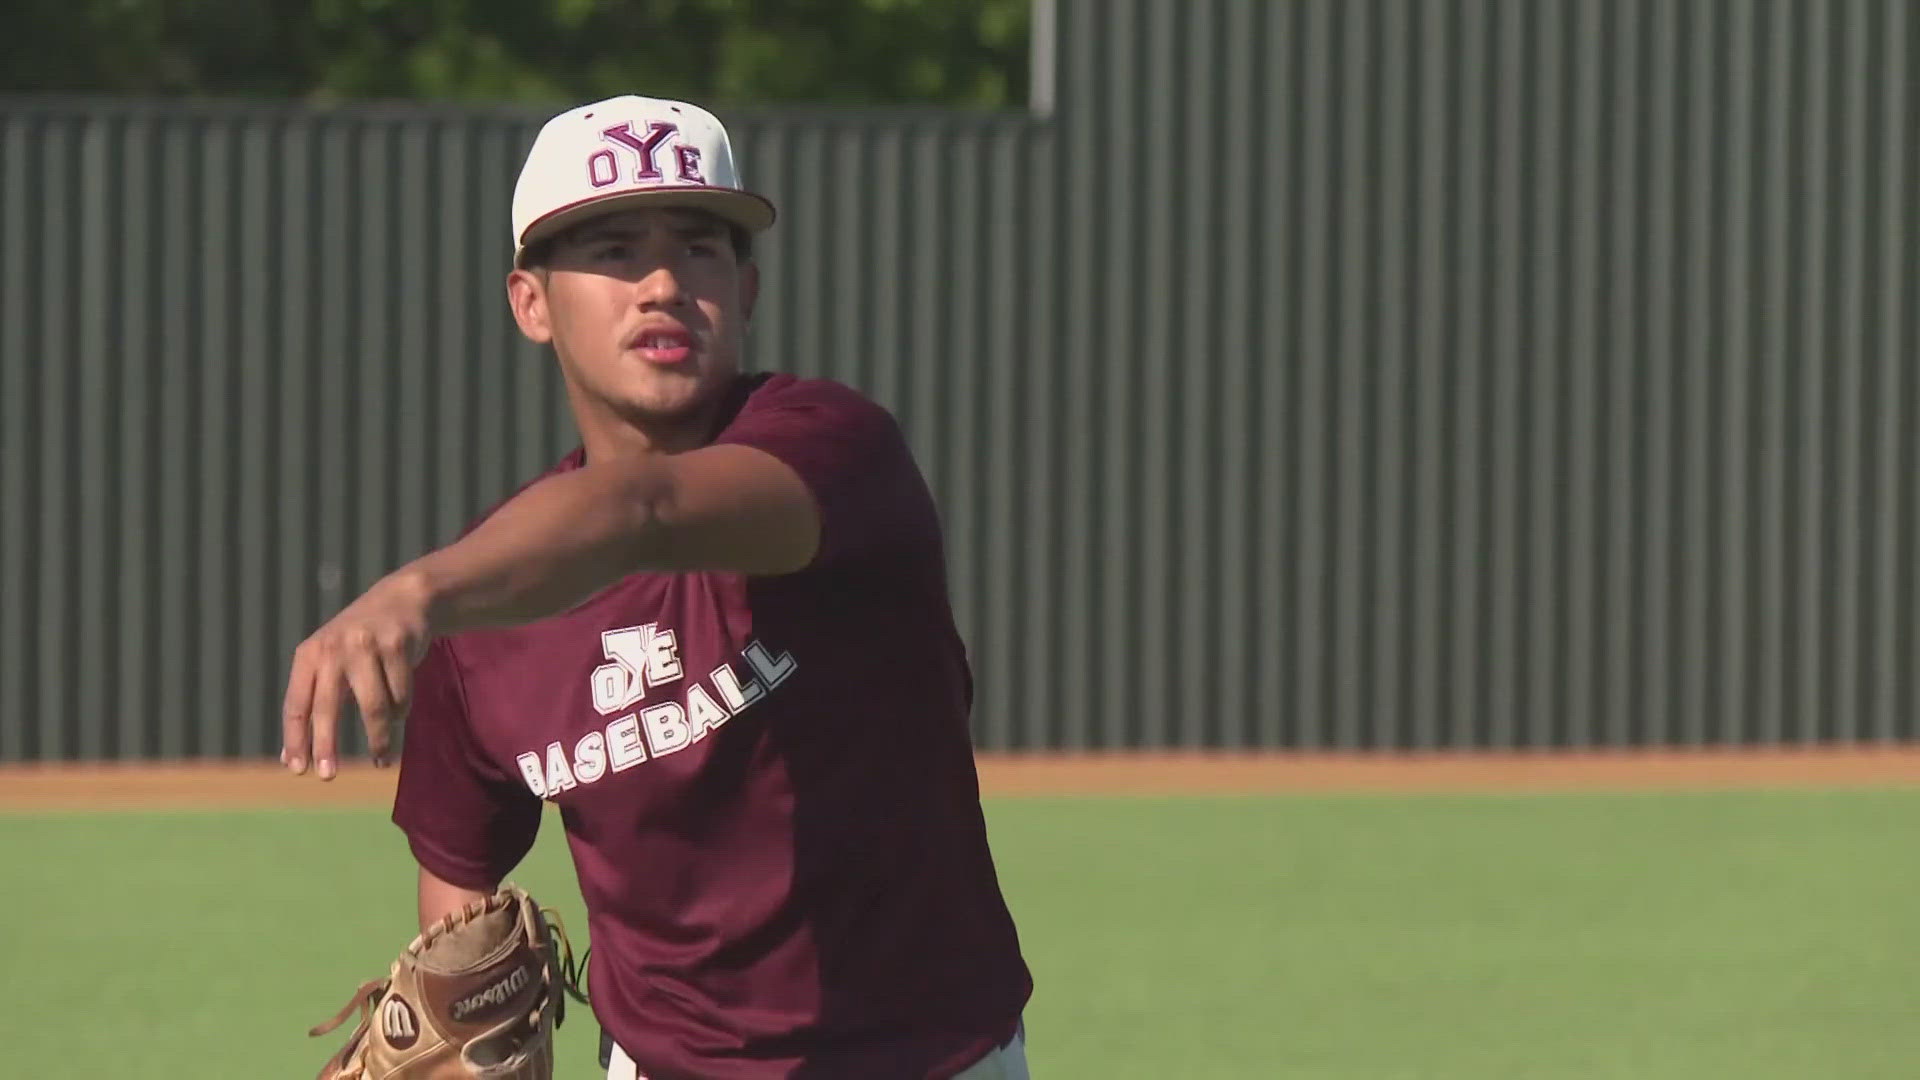 The Cameron Yoe baseball ace has defied odds on the field and throughout his life.